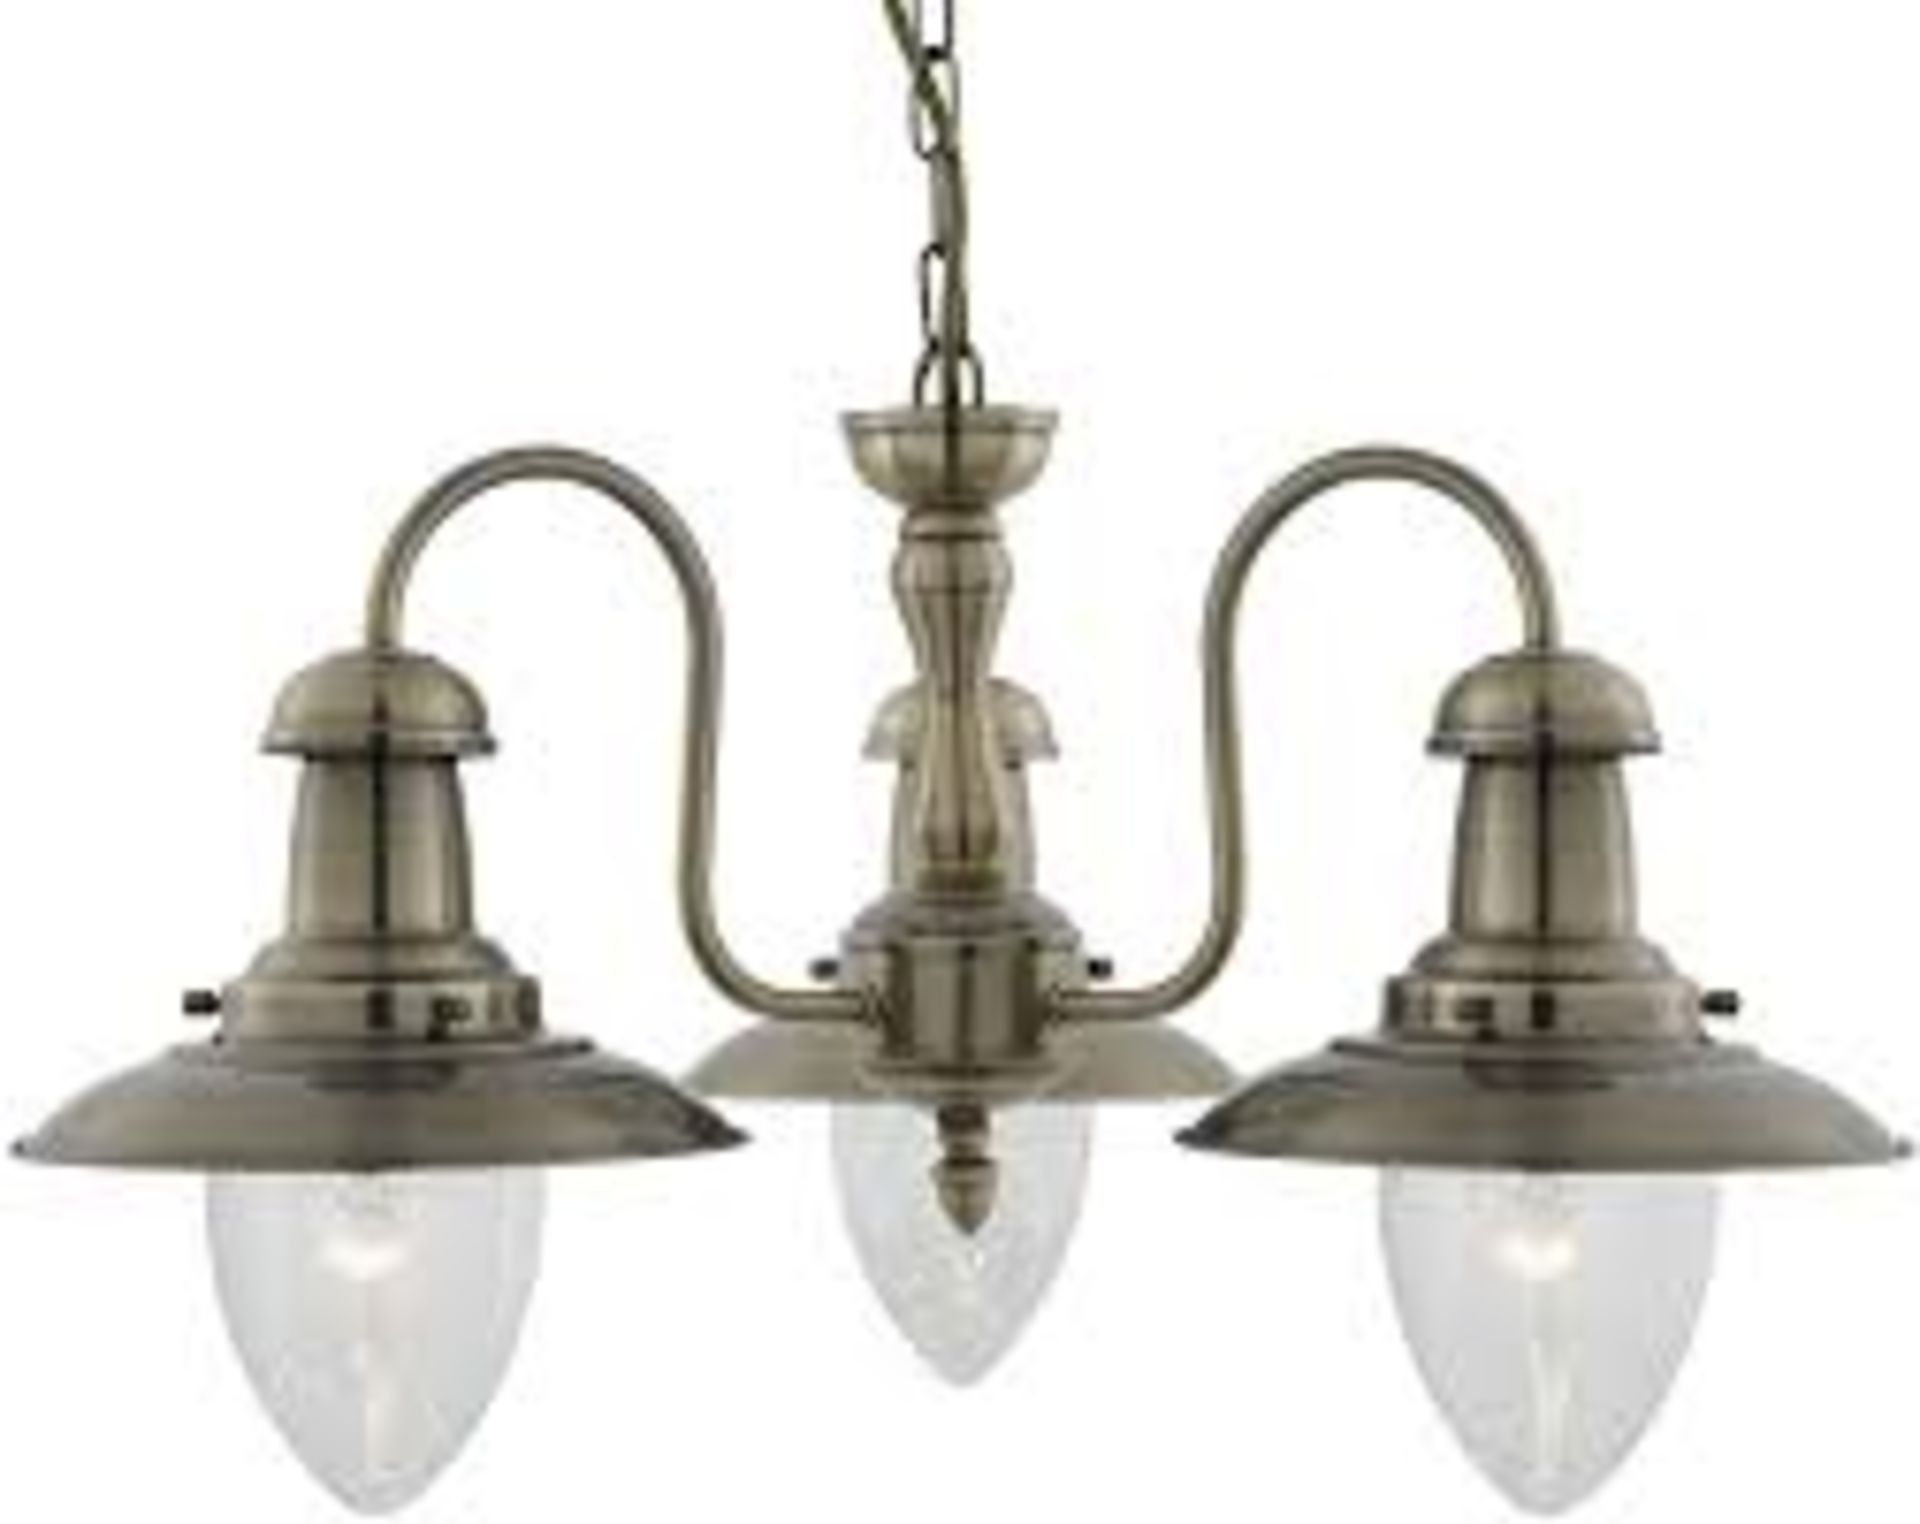 1 x Searchlight Fisherman Antique Brass 3 light Fitting - Ref: 5333-3AB - New and Boxed - RRP: £144 - Image 4 of 4